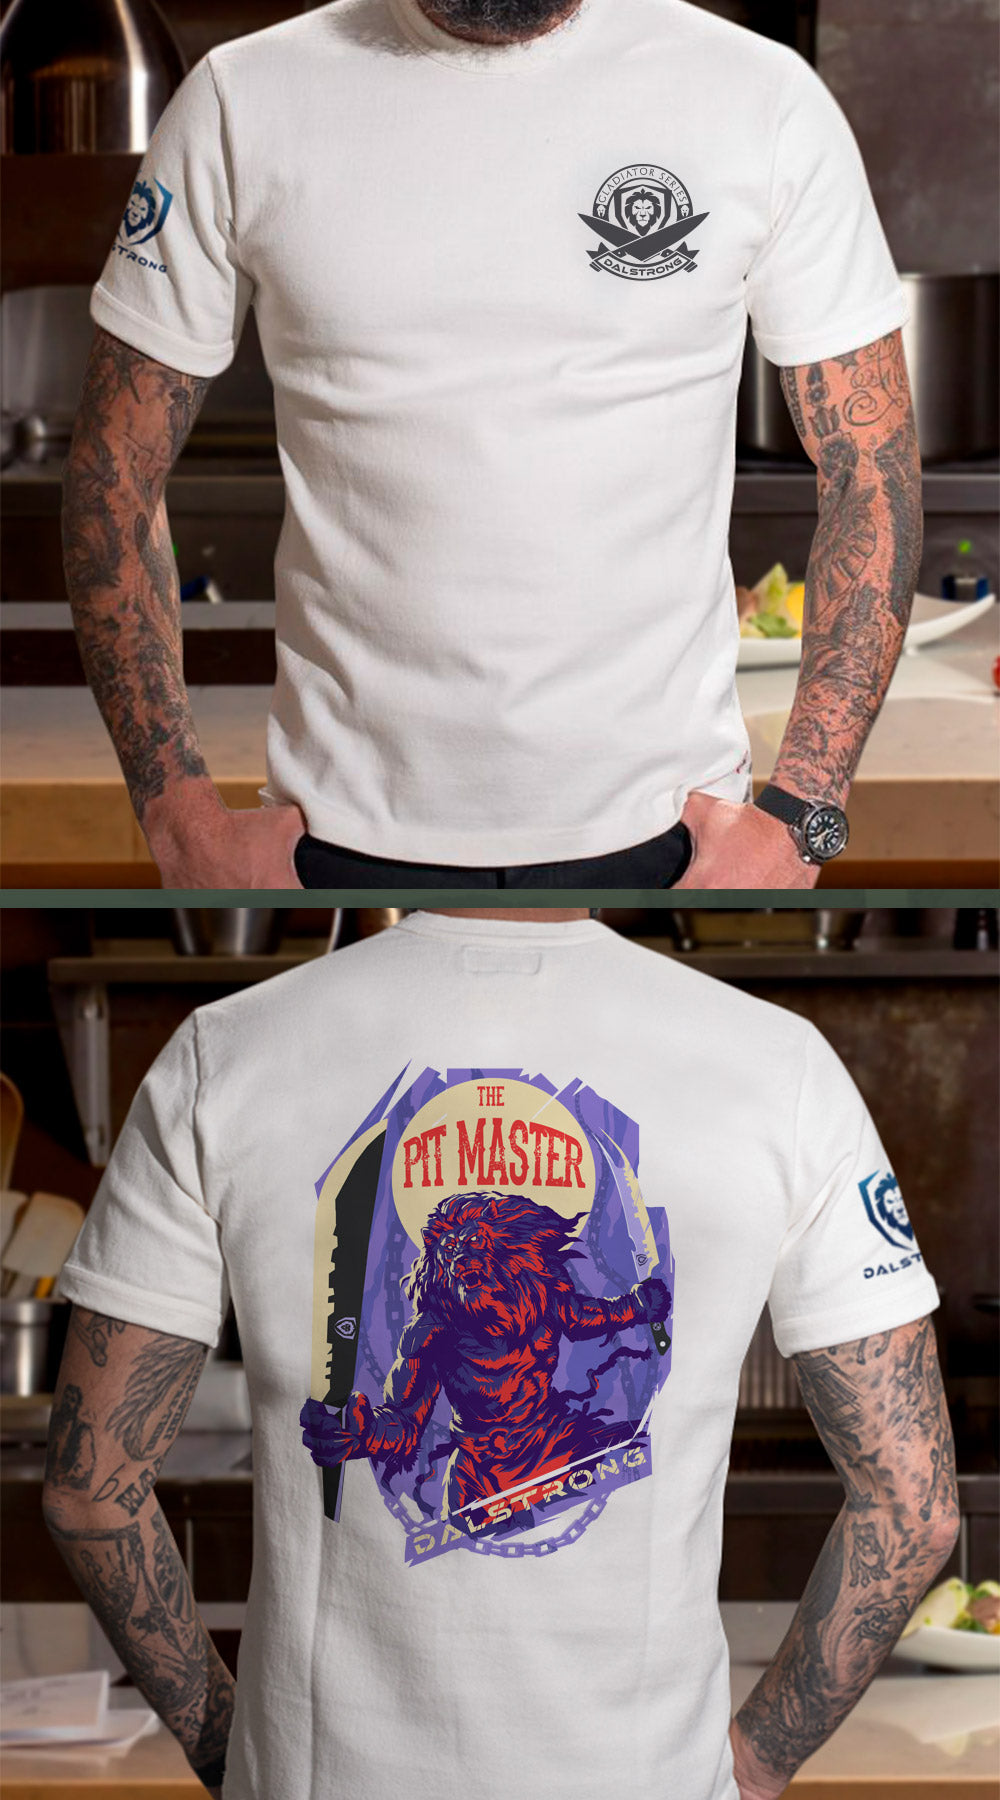 Dalstrong beast mode on tee white front and back preview.